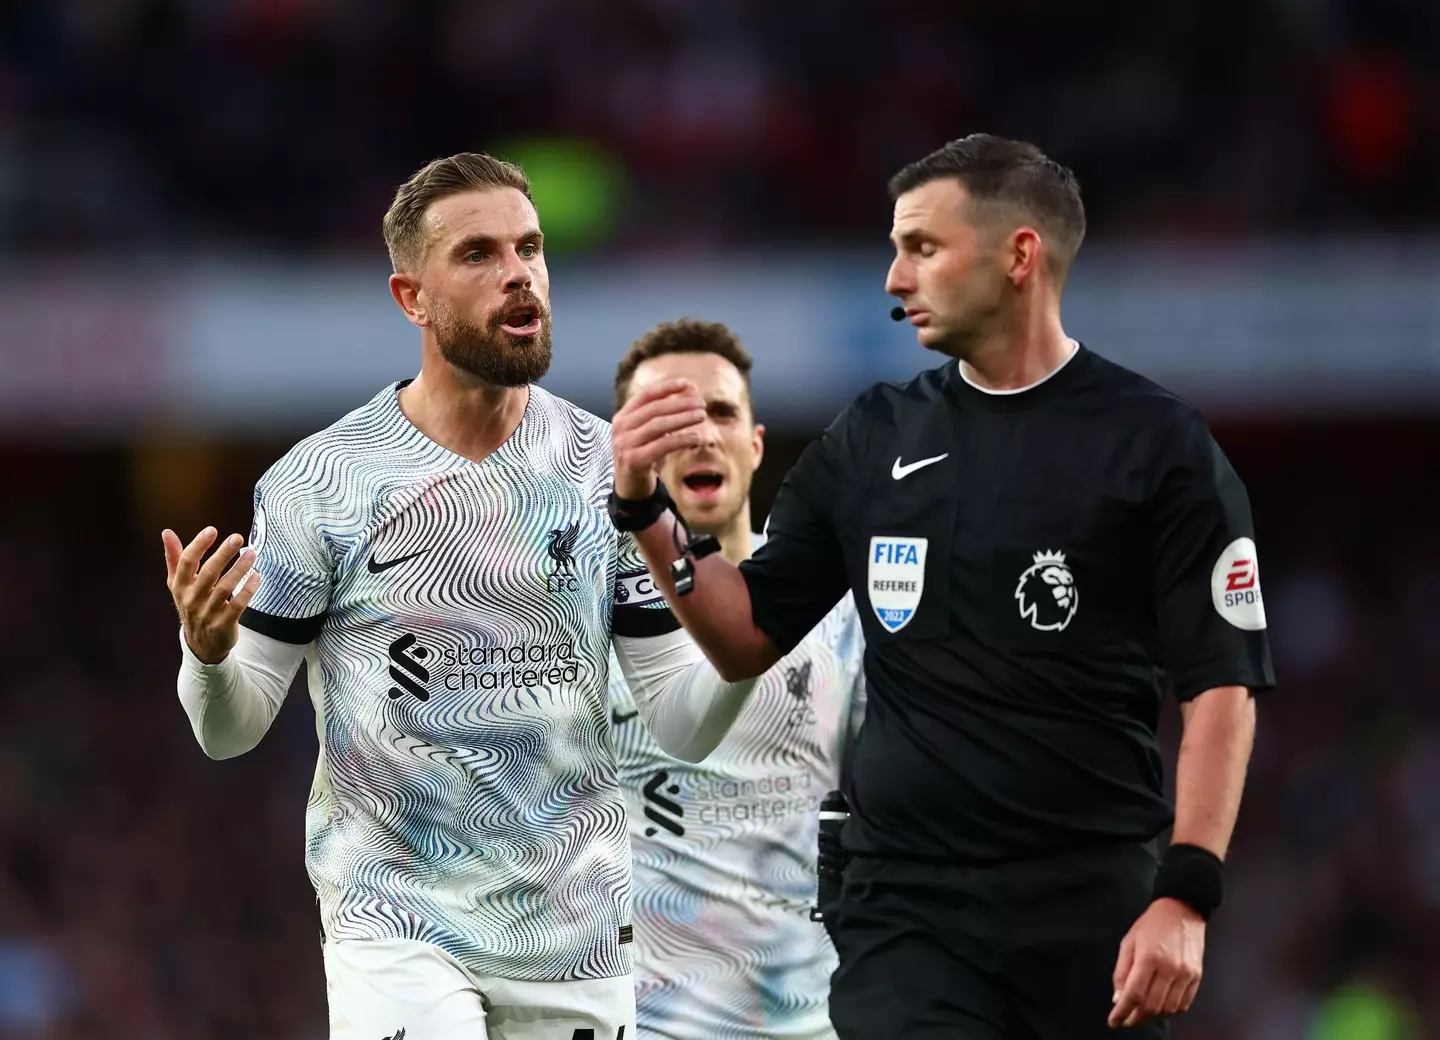 Liverpool were not happy with the officiating. Image: Alamy